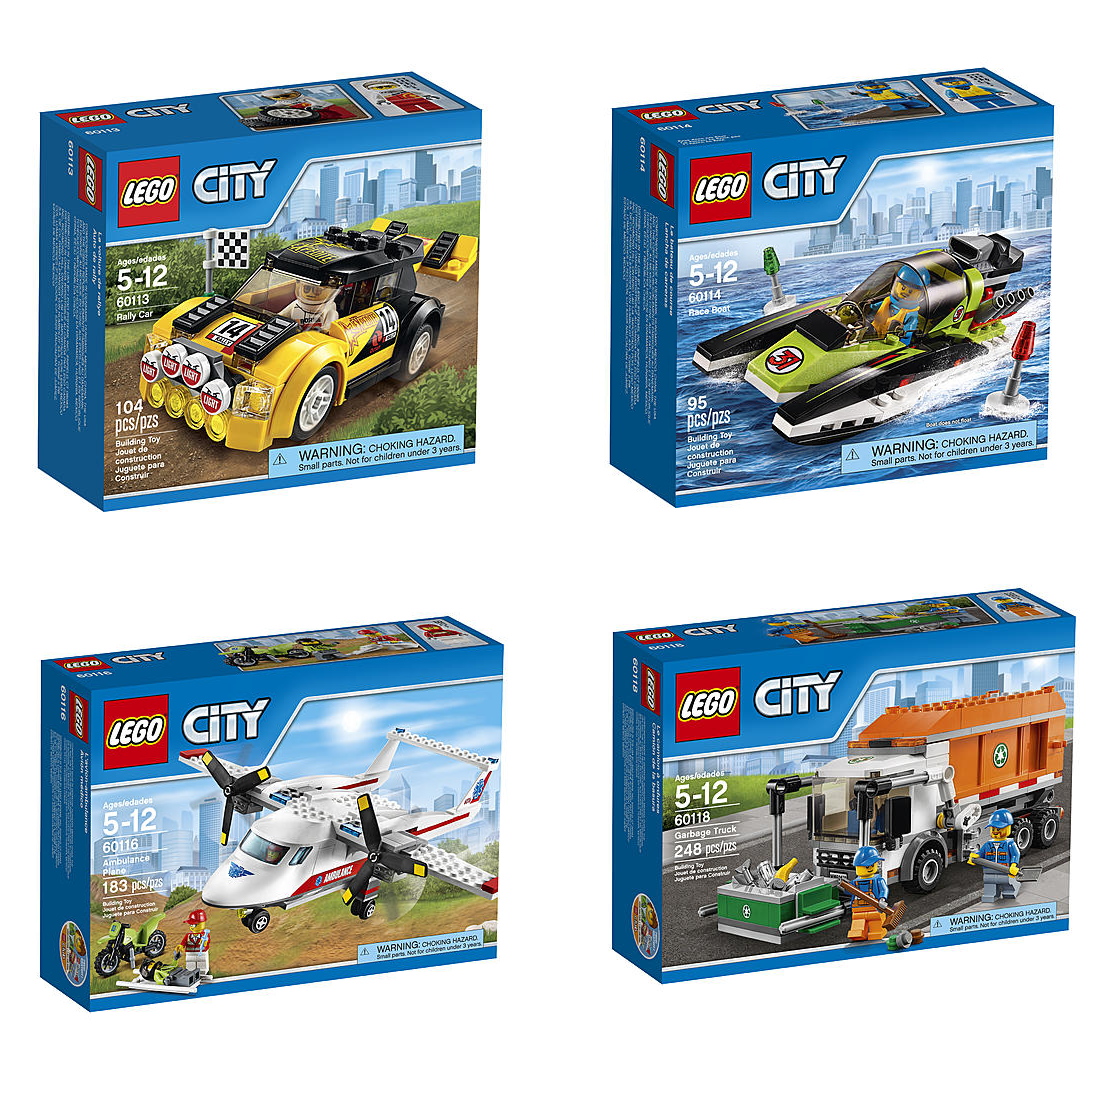 LEGO City Deals Happening at Kmart! Lowest Prices We’ve Seen on Some Sets!